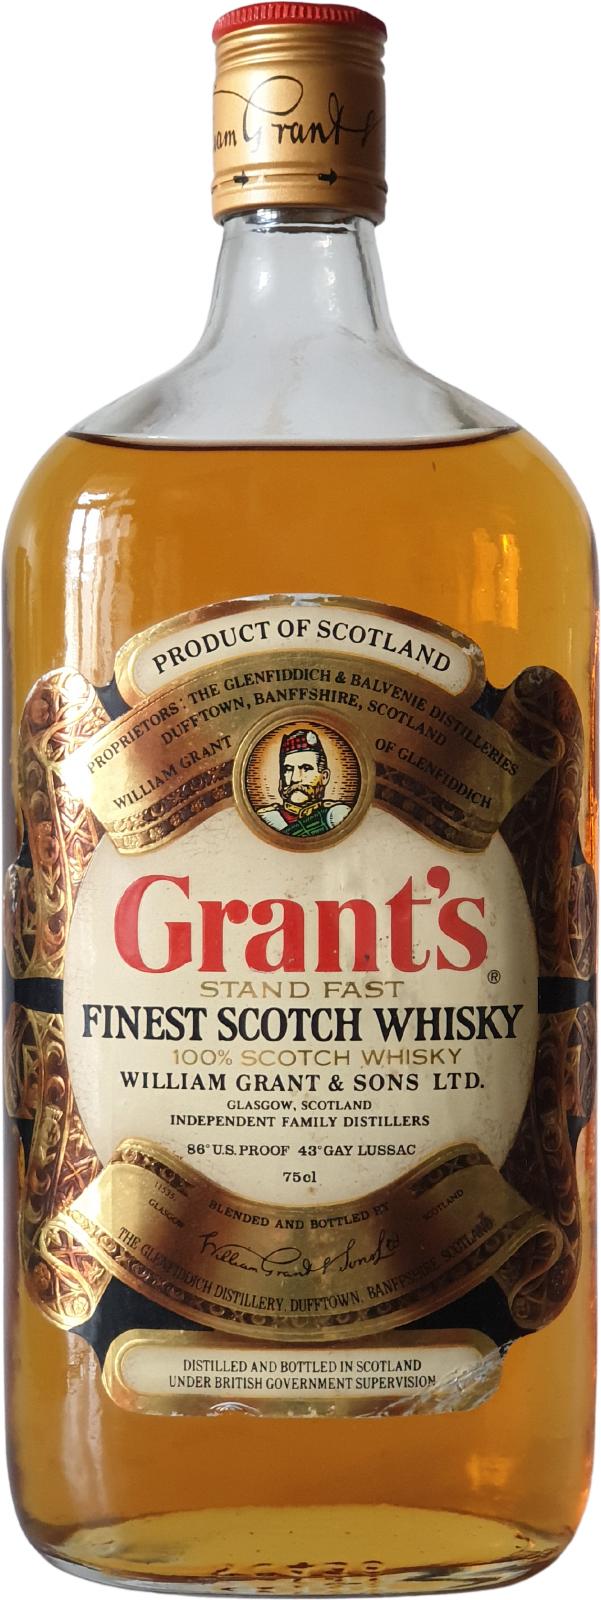 William Grant's Stand Fast (Label No. 11680) Finest Scotch Whisky